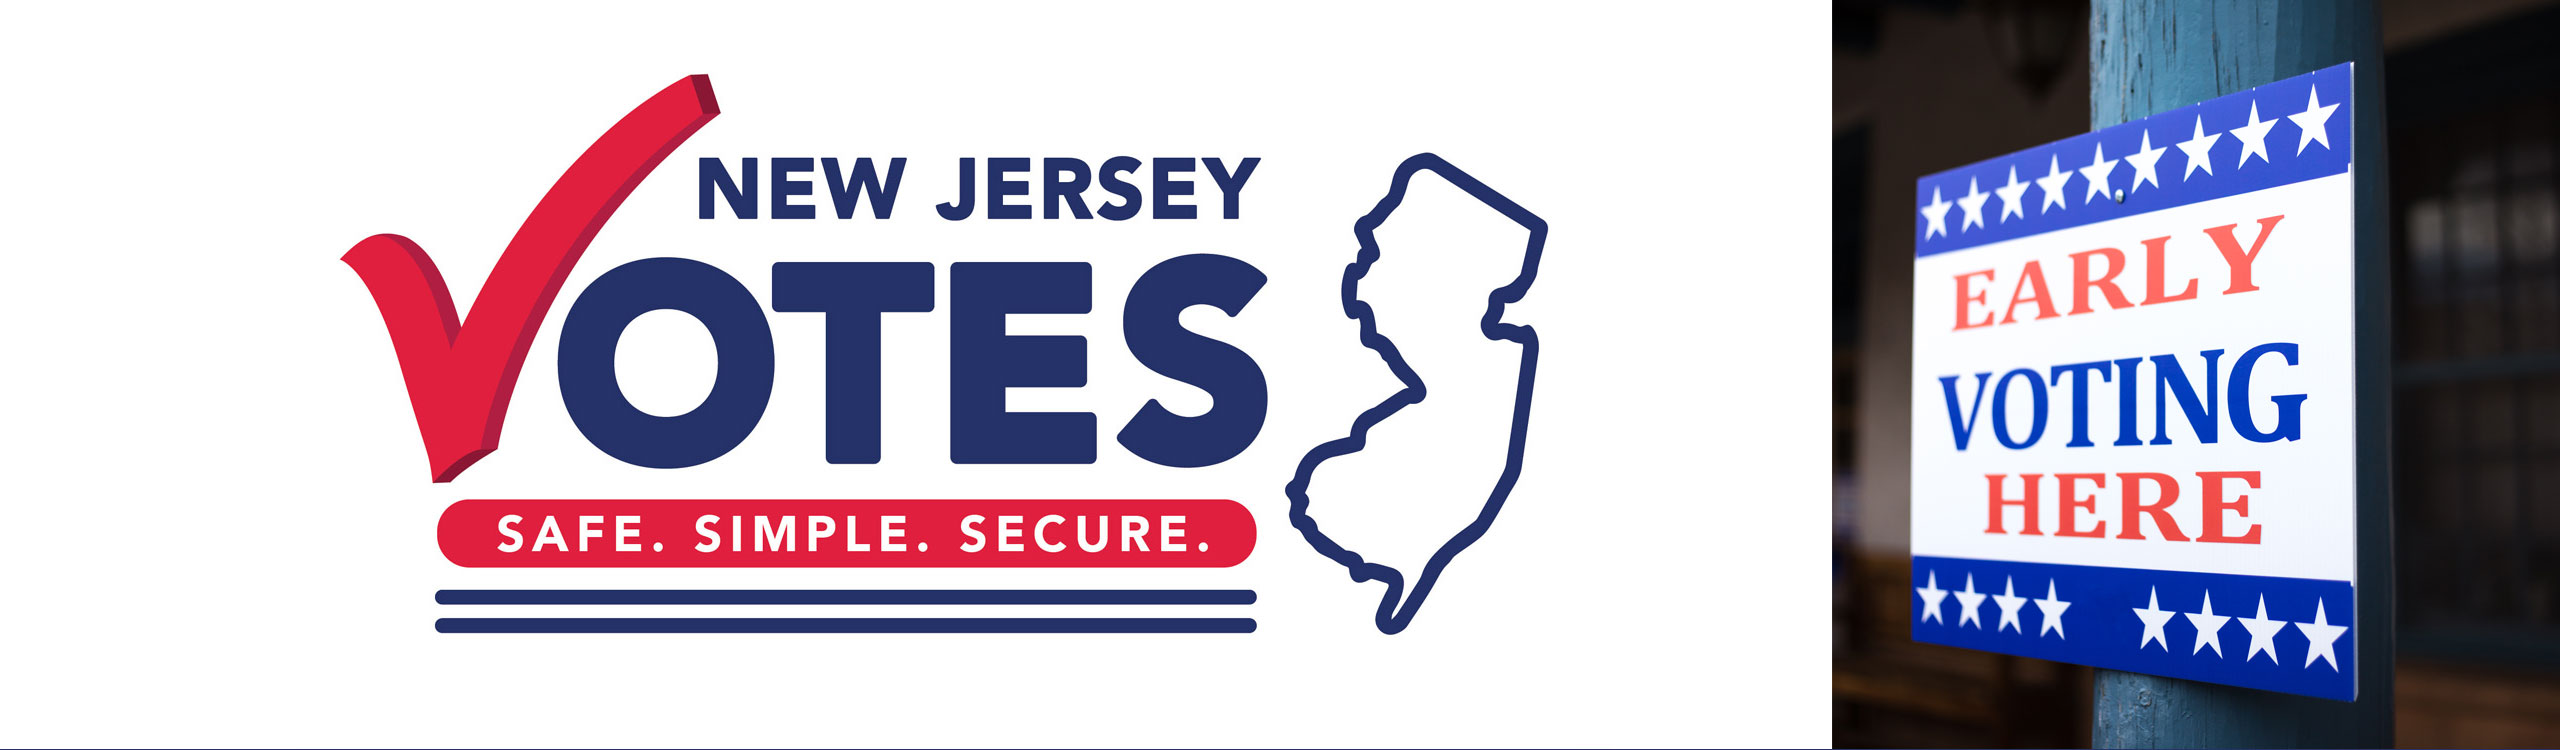 NJ Division of Elections